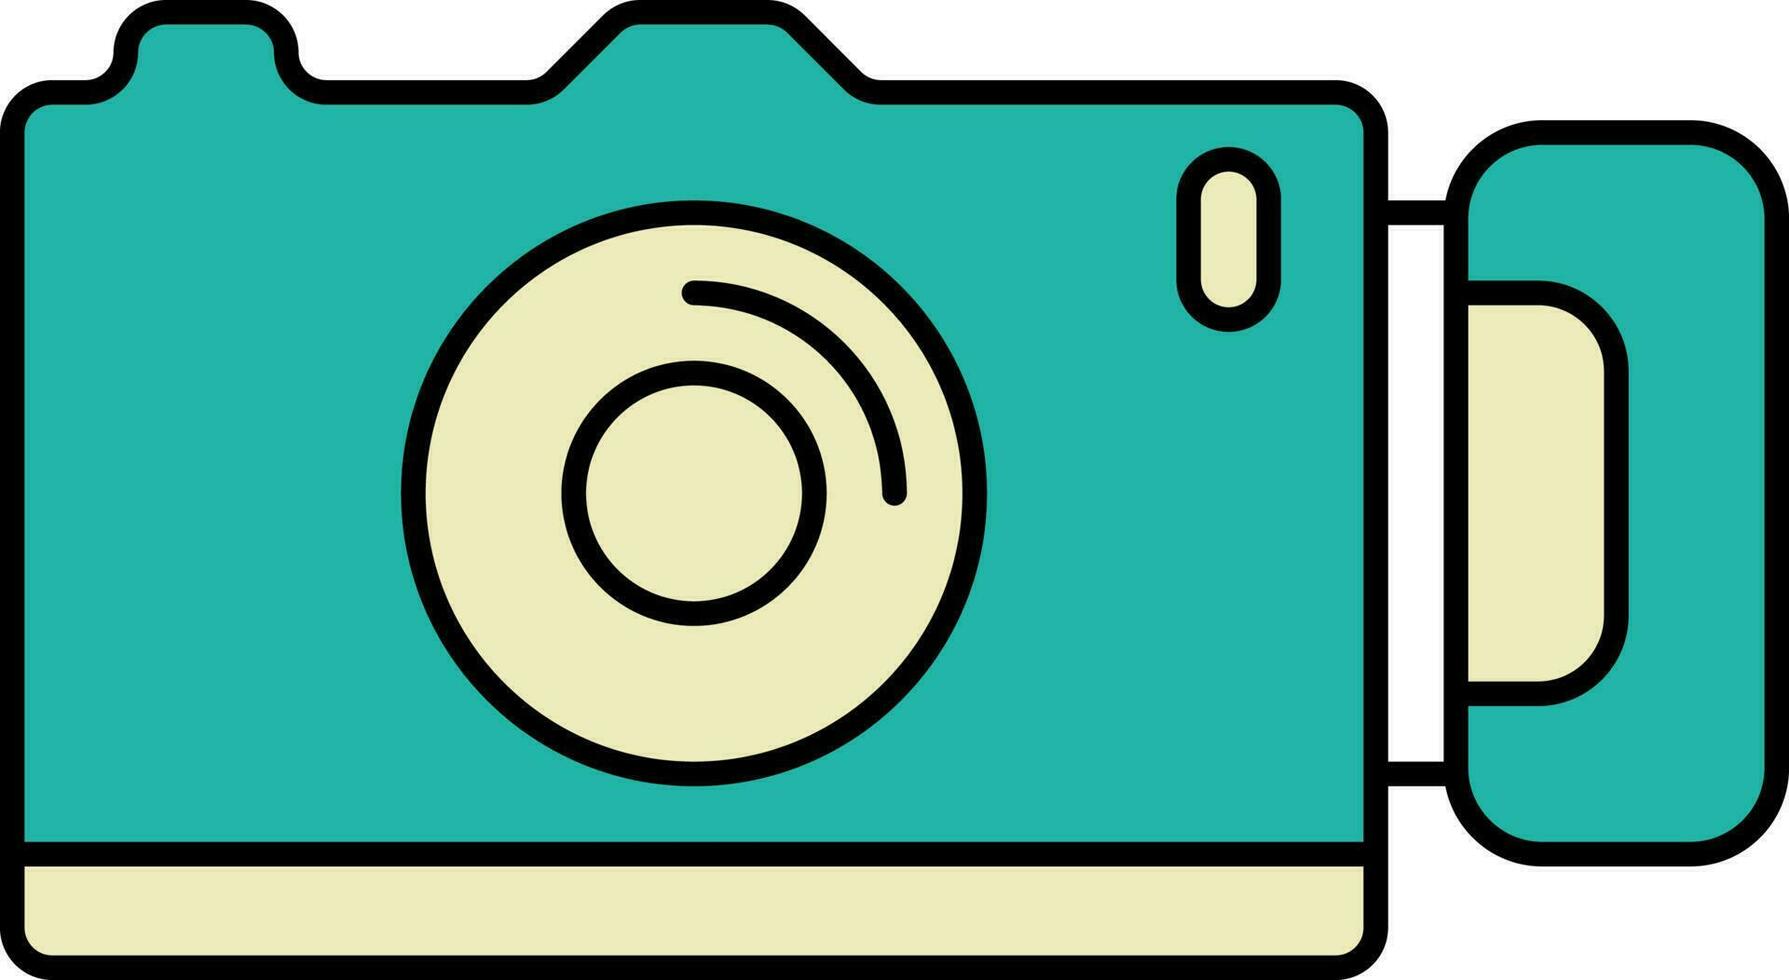 Photography Camera Flat Icon In Teal And Yellow Color. vector